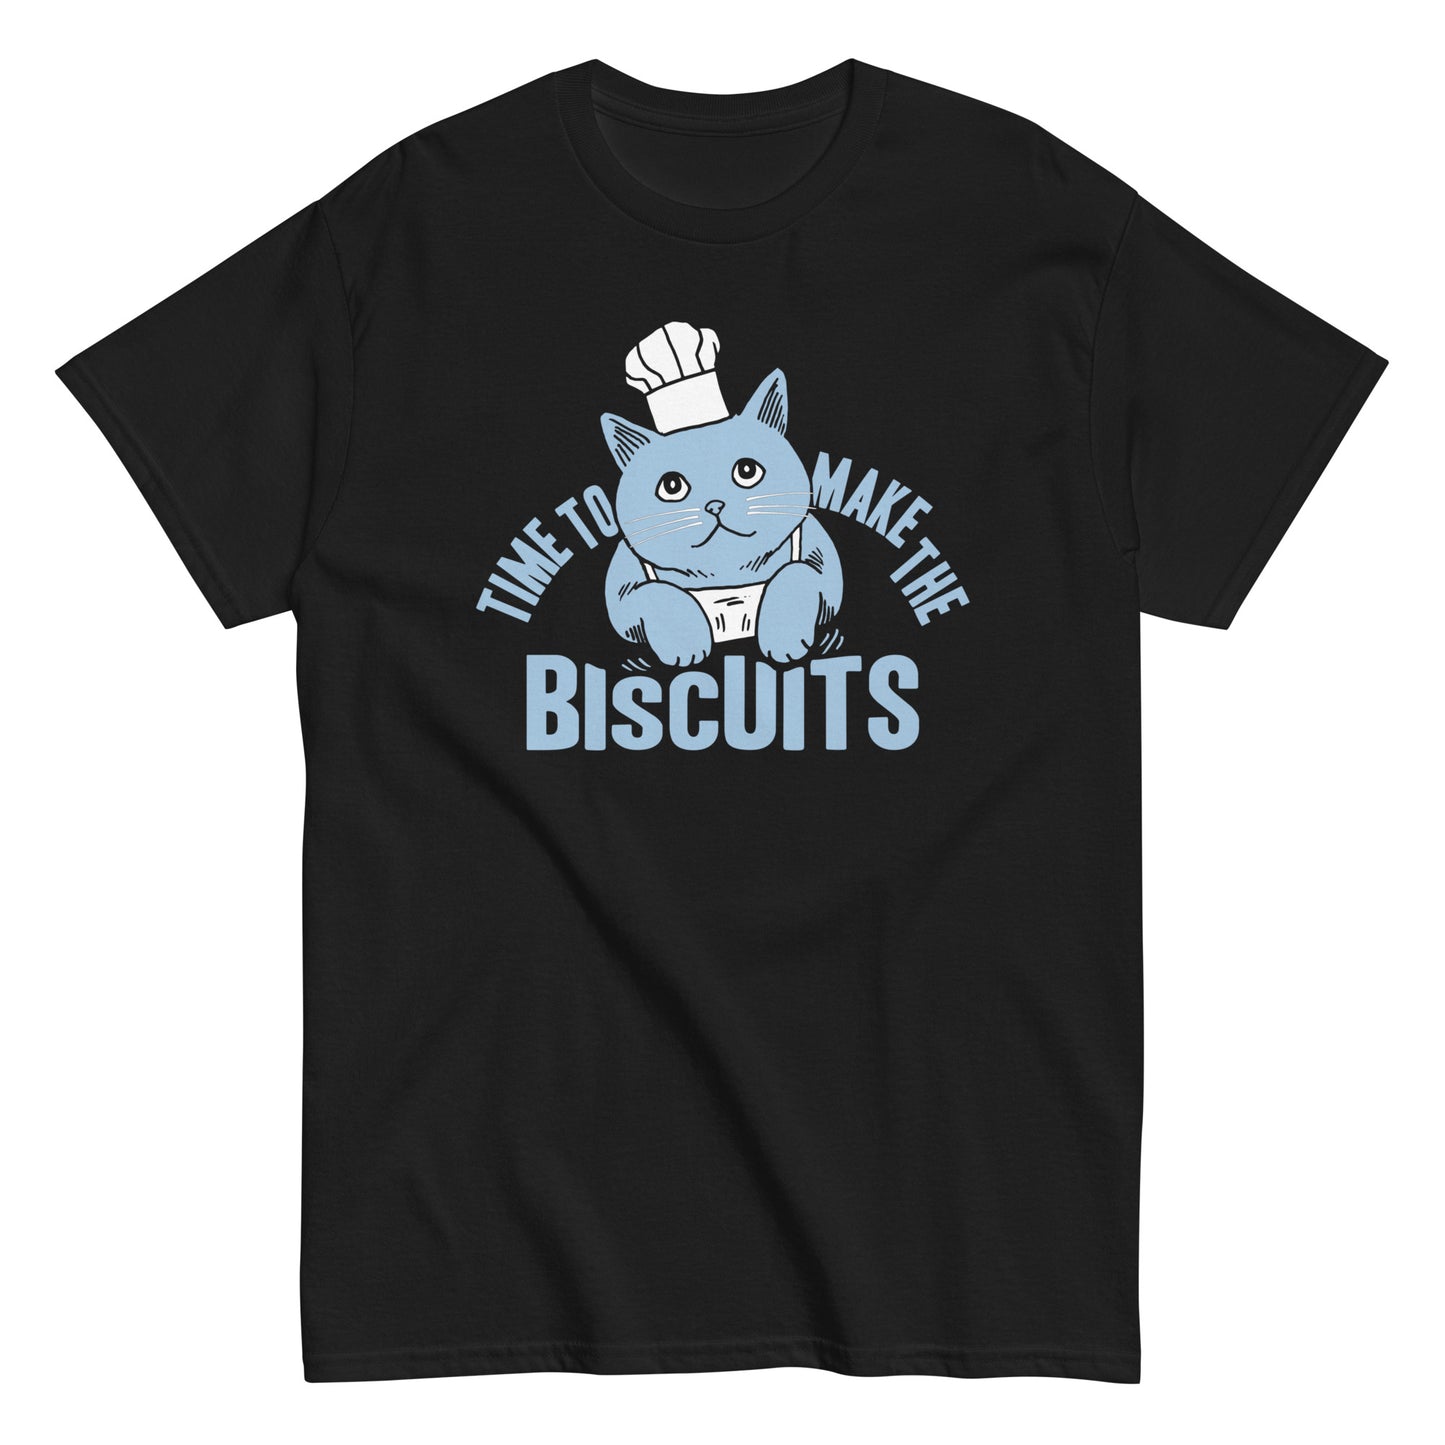 Time To Make The Biscuits Men's Classic Tee